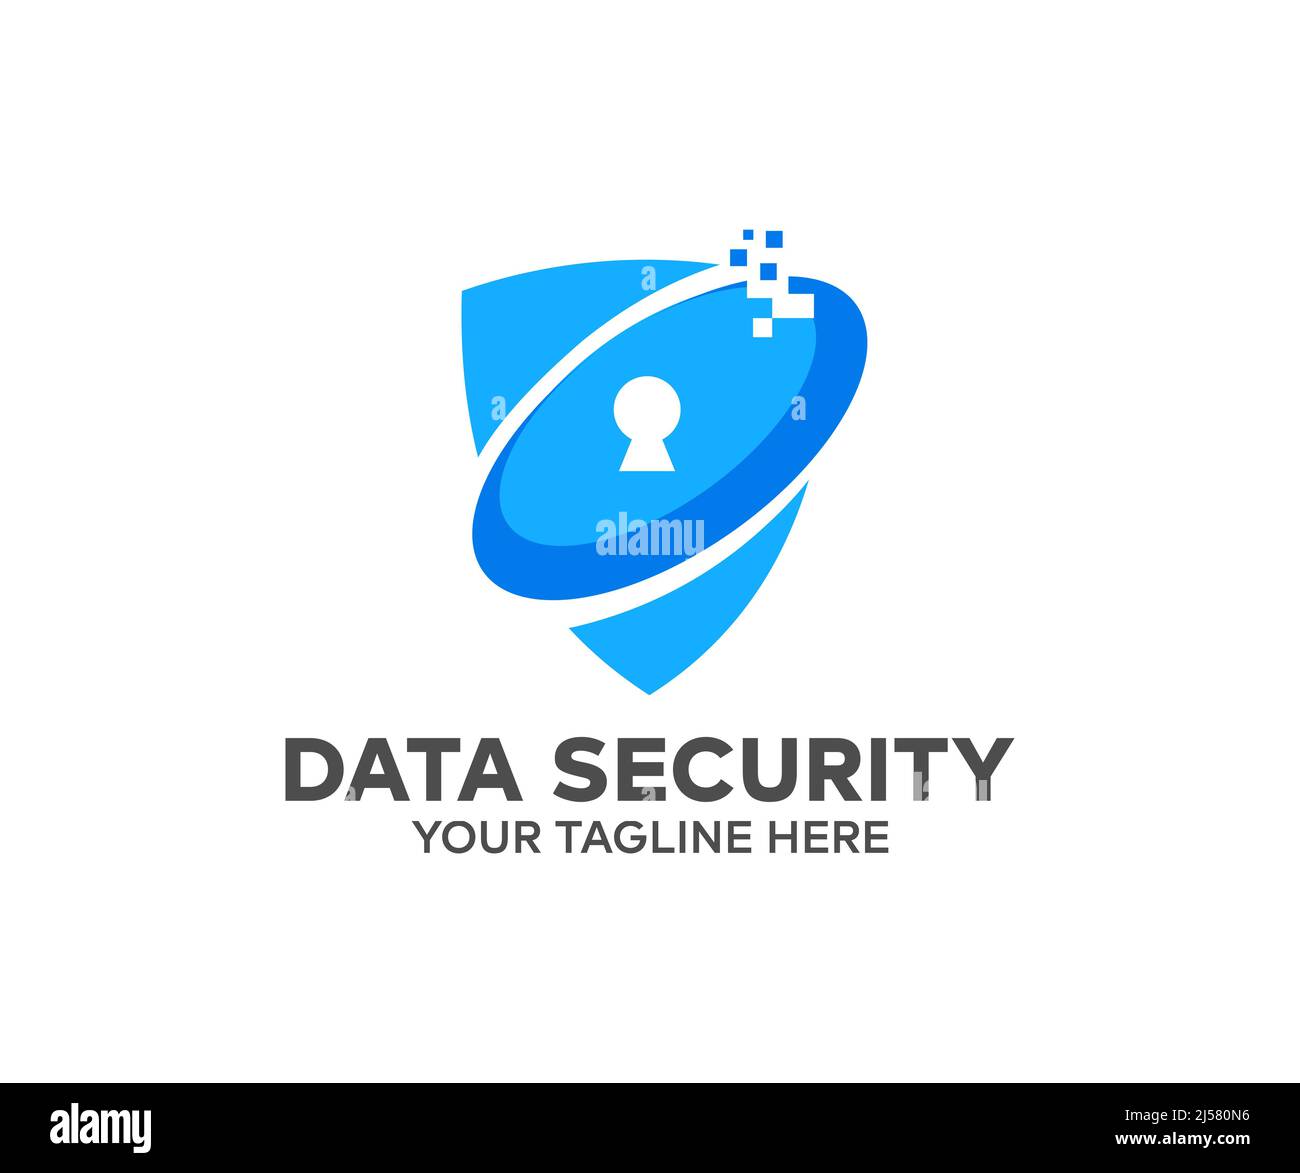 Data security, digital, online security internet logo design. Digital data security and cybersecurity online vector design and illustration. Stock Vector